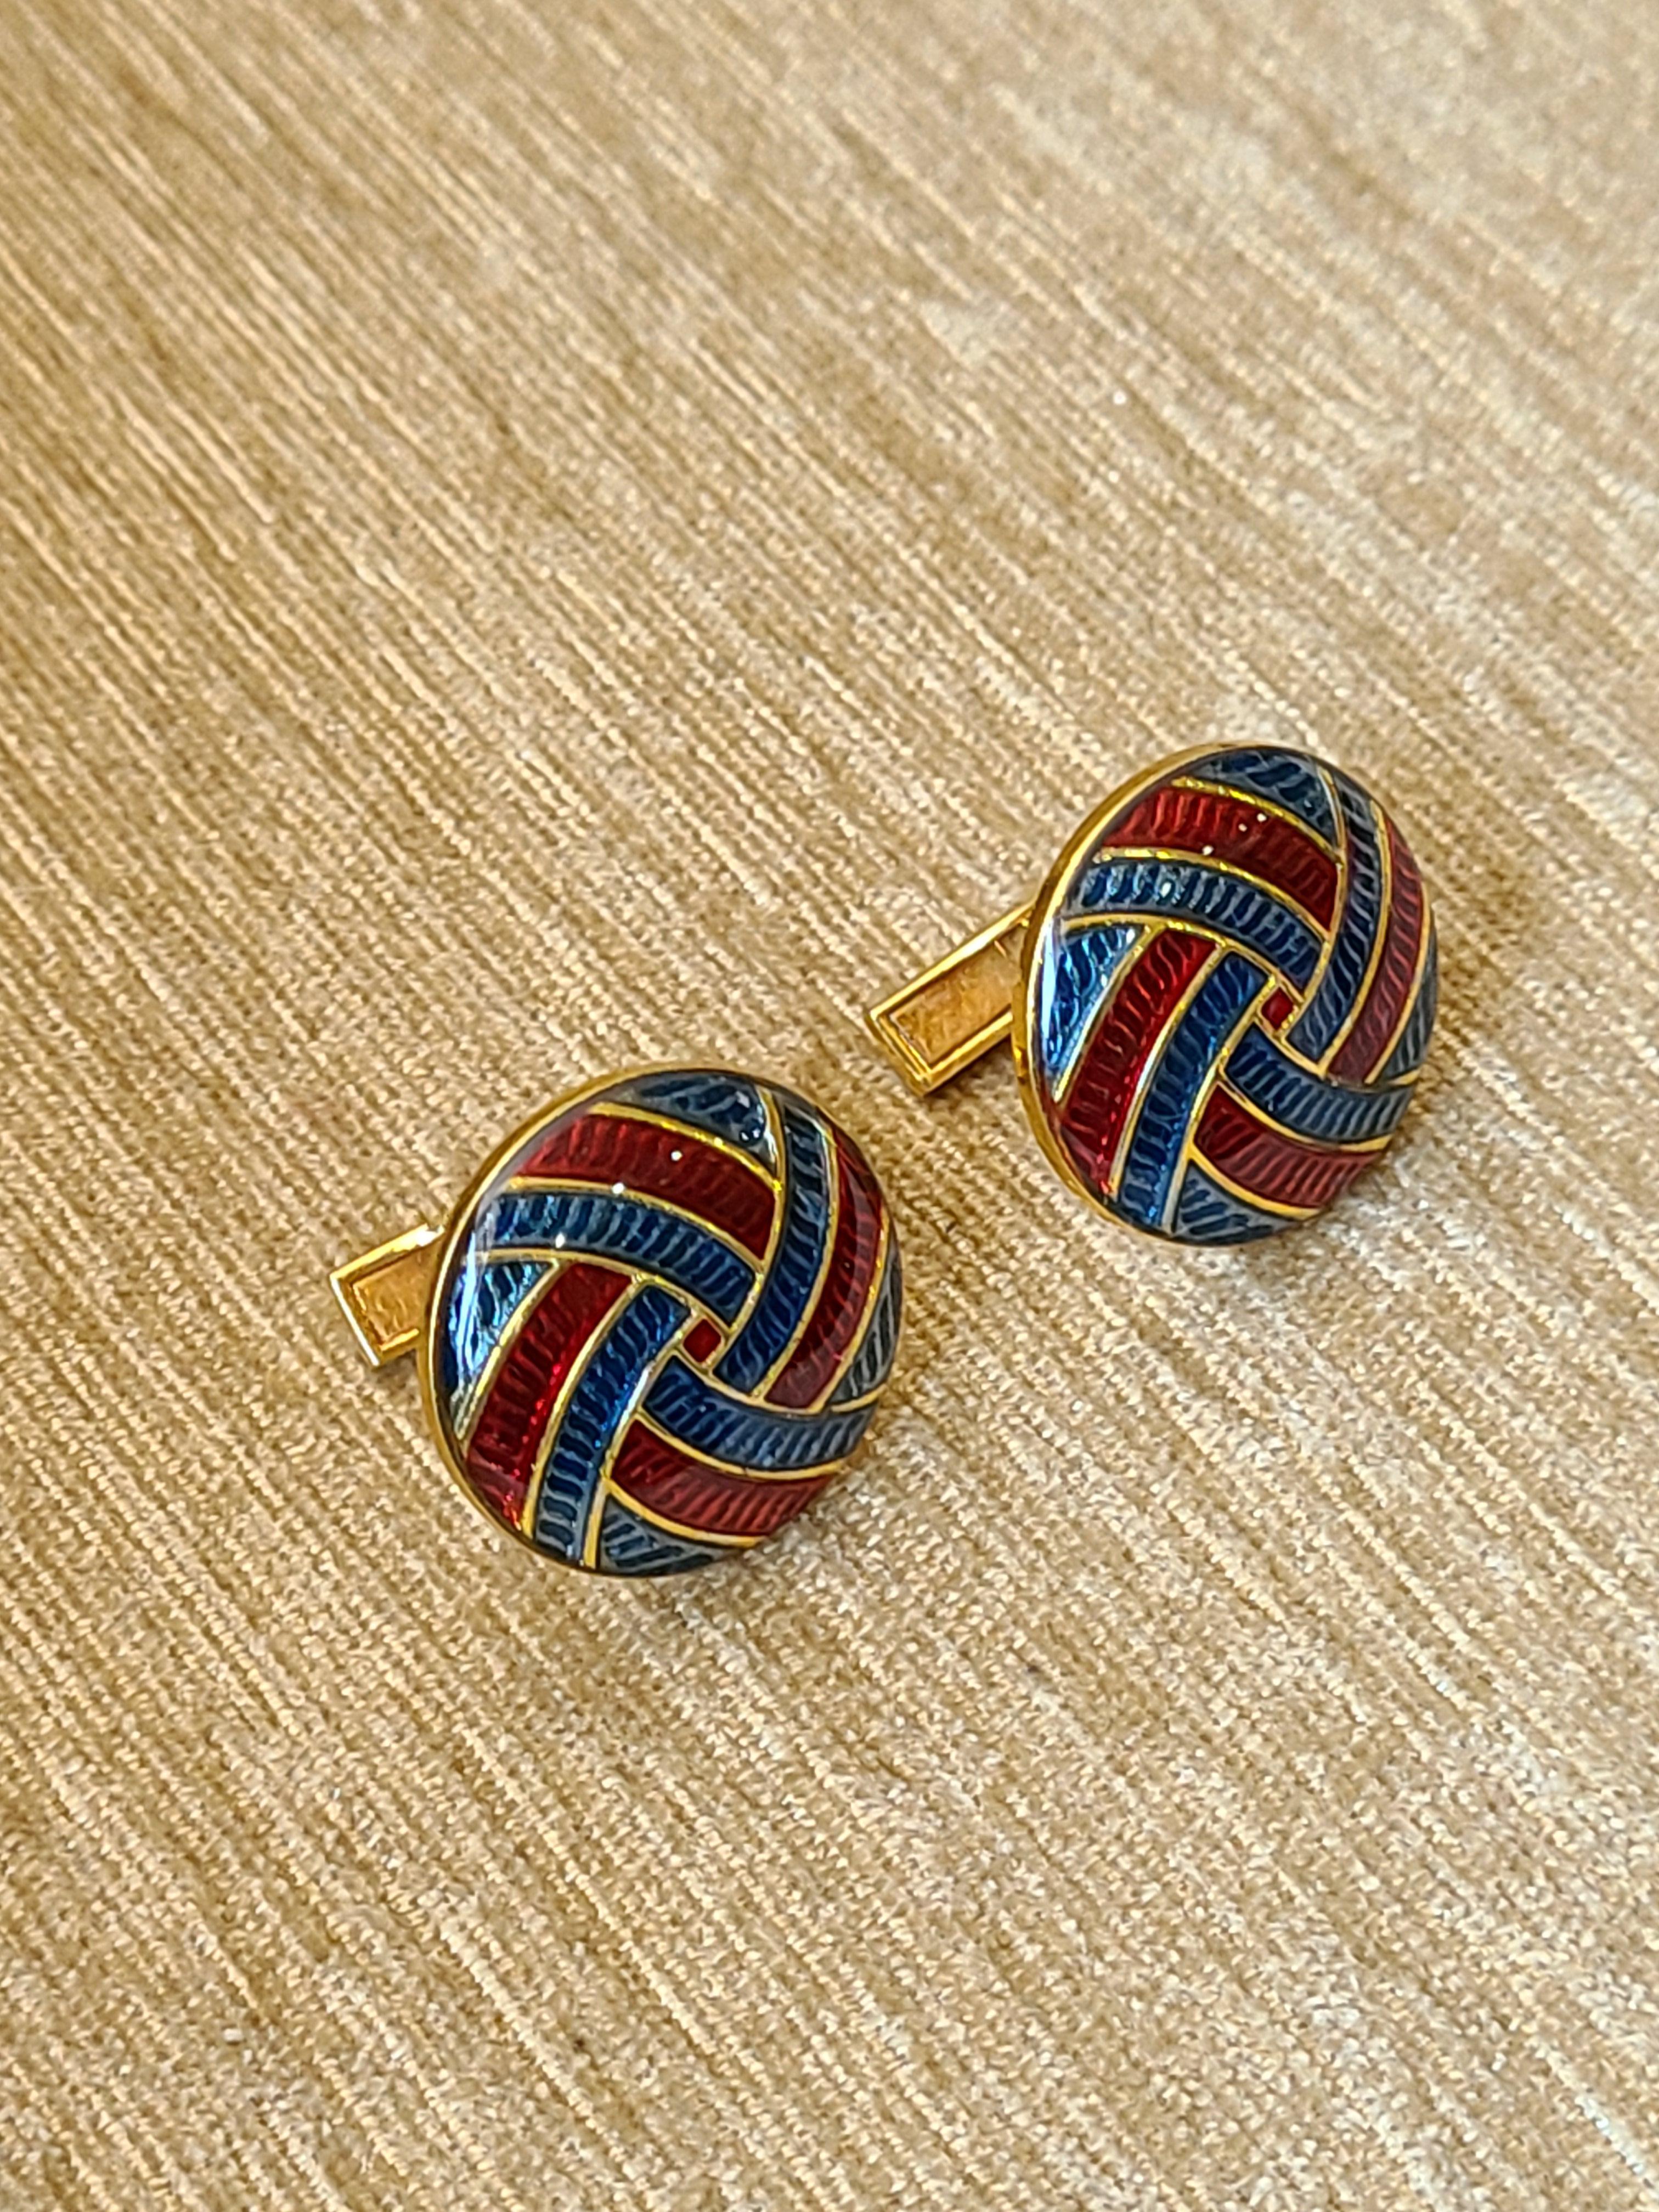 A unique set of cufflinks with blue and red enamel made in 14 k yellow gold. The enamel cufflinks net gold weight is 13.47 grams and dimensions in cm 2 x 2 x 1.7 (LXWXD).